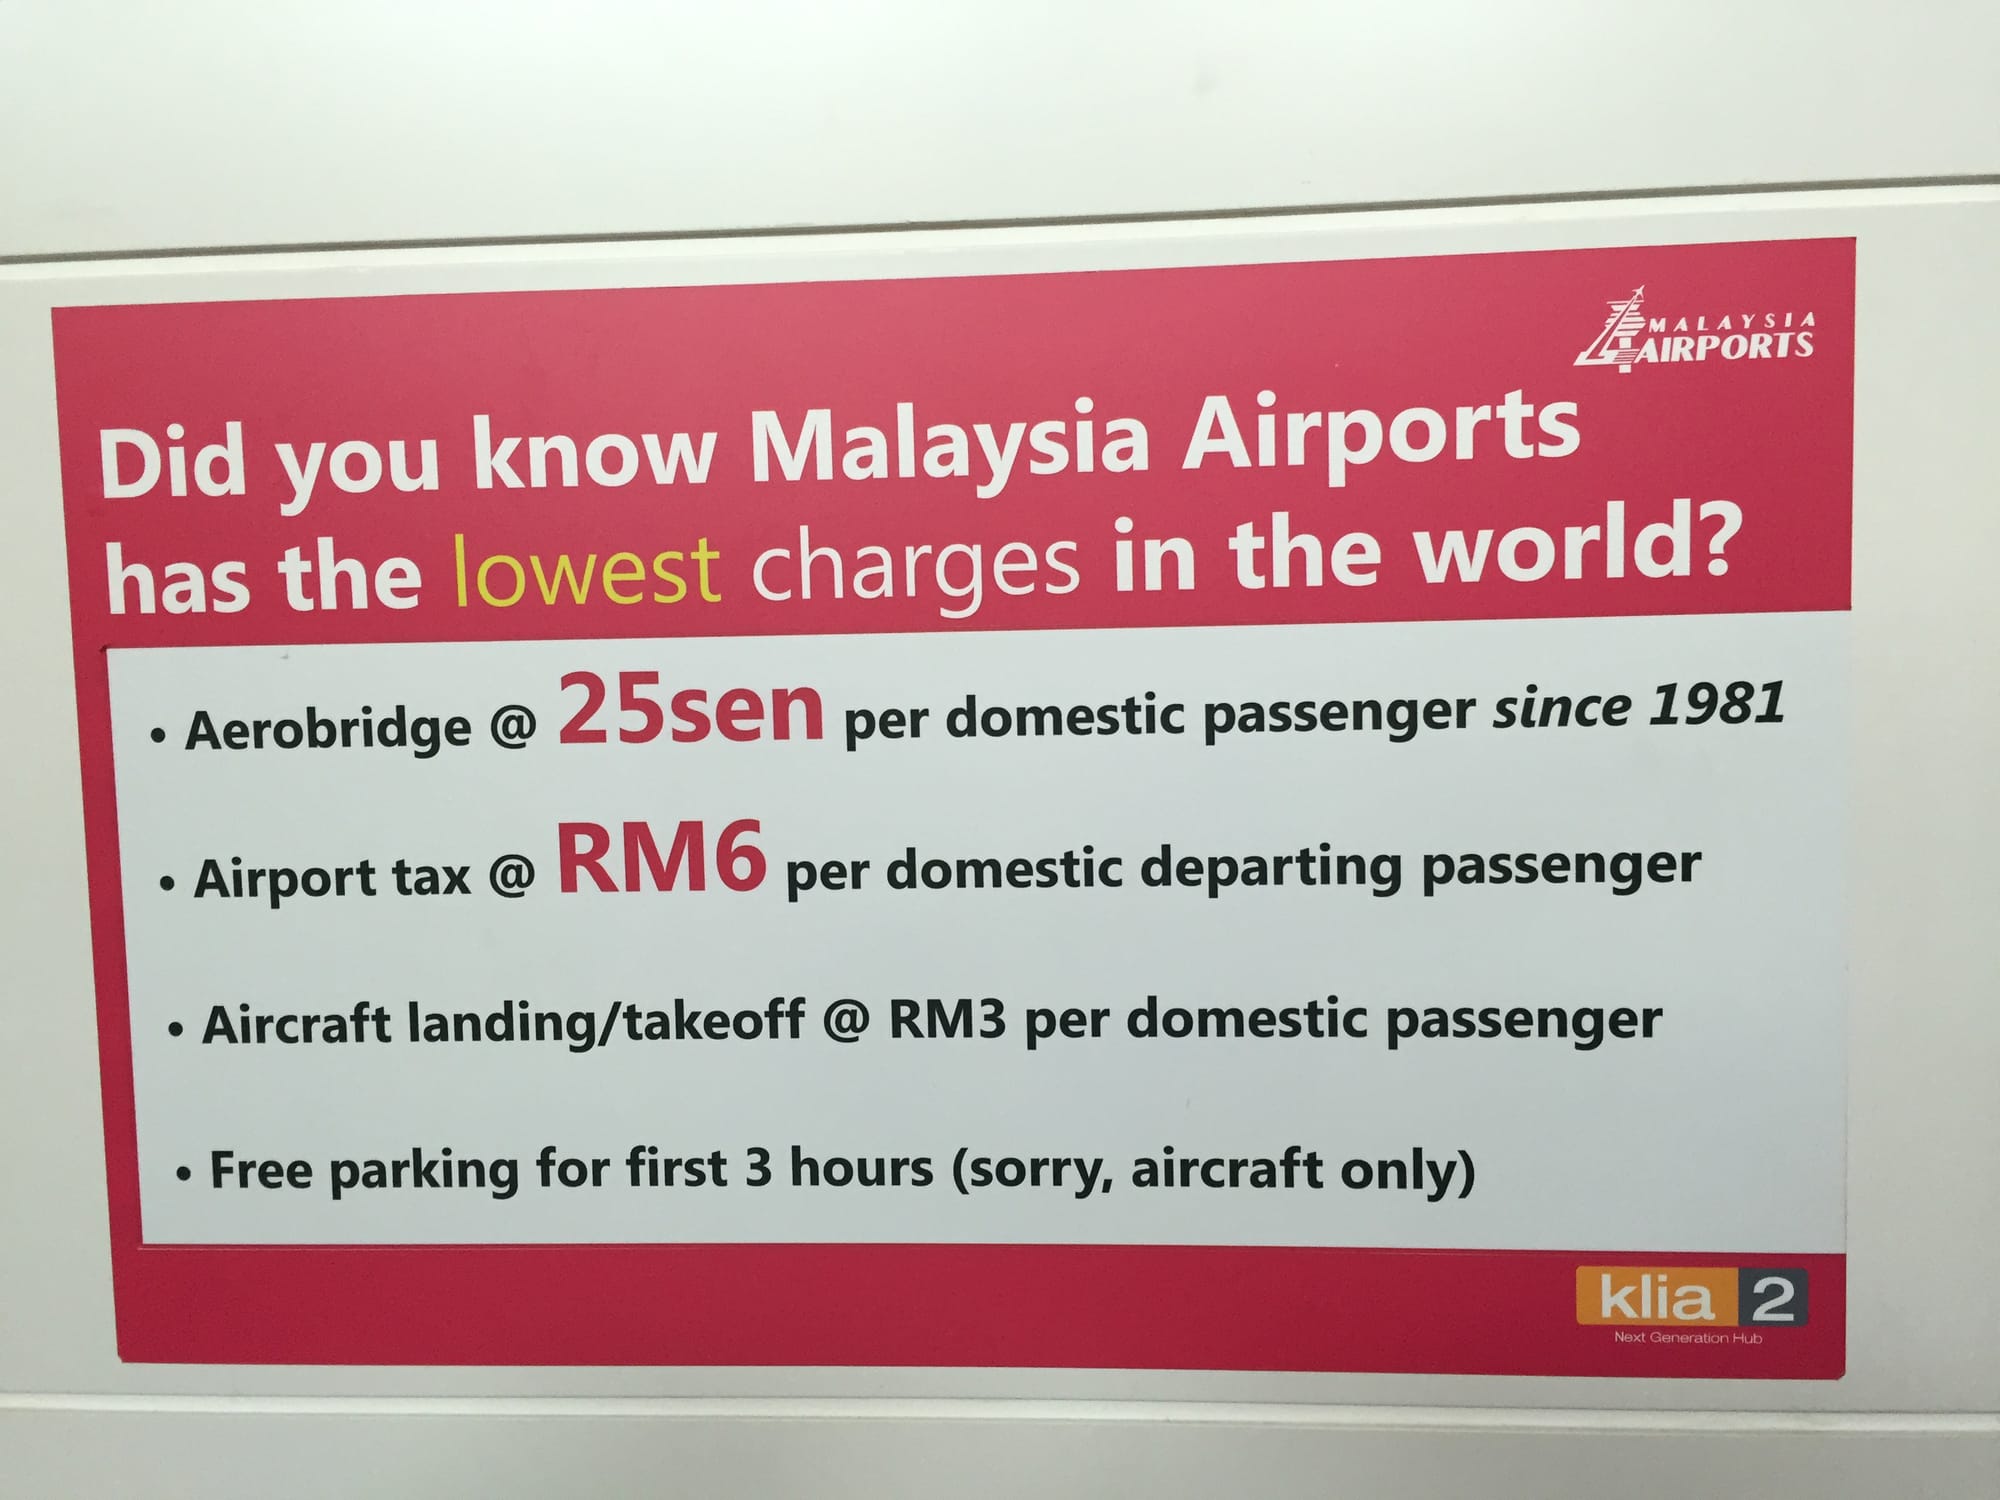 Photo by Author — did you know that about Malaysian airports?